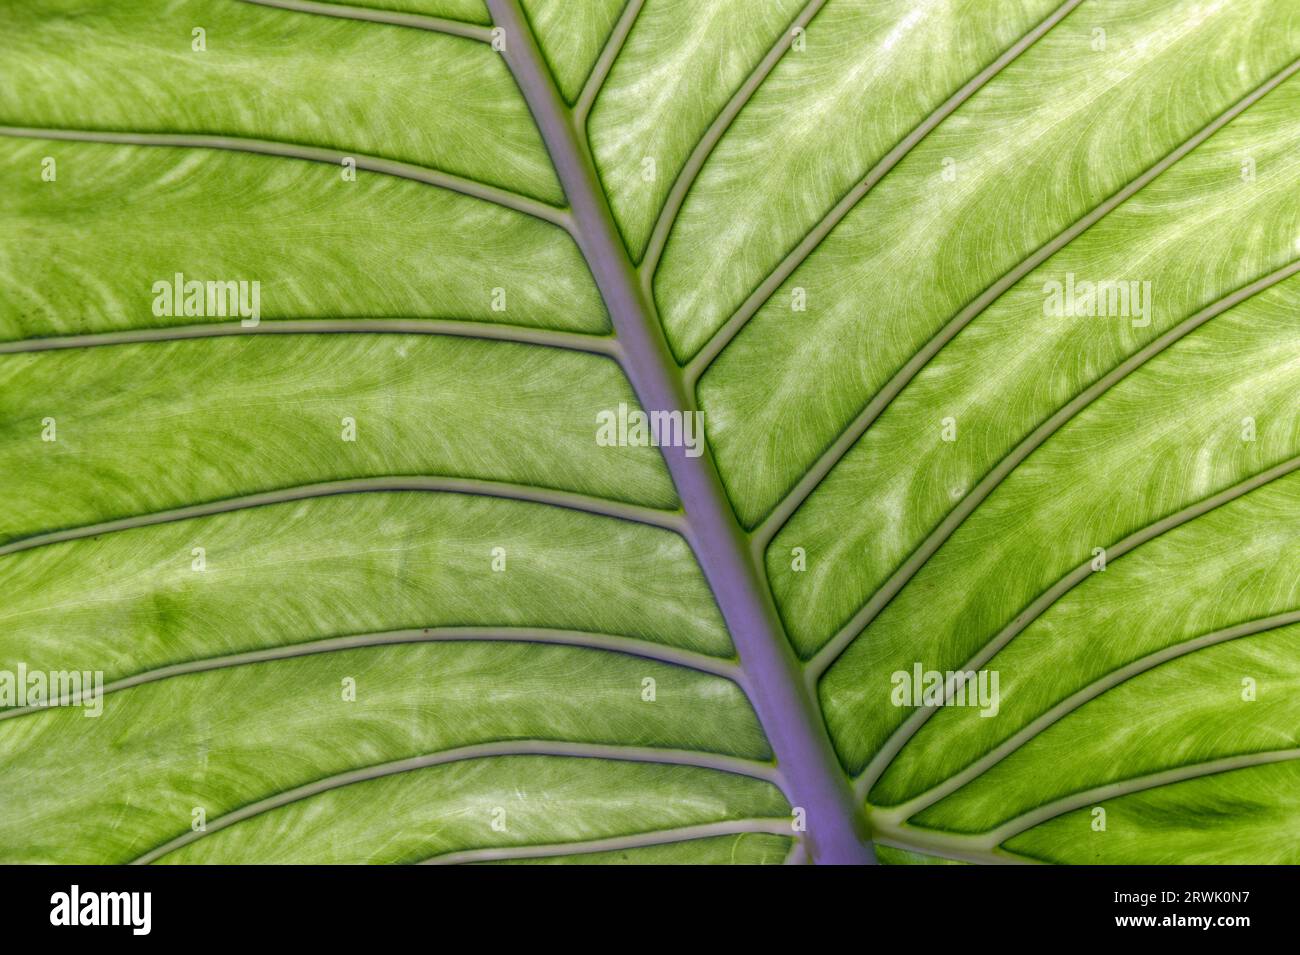 Detailed study of a leaf (structure and texture) Stock Photo